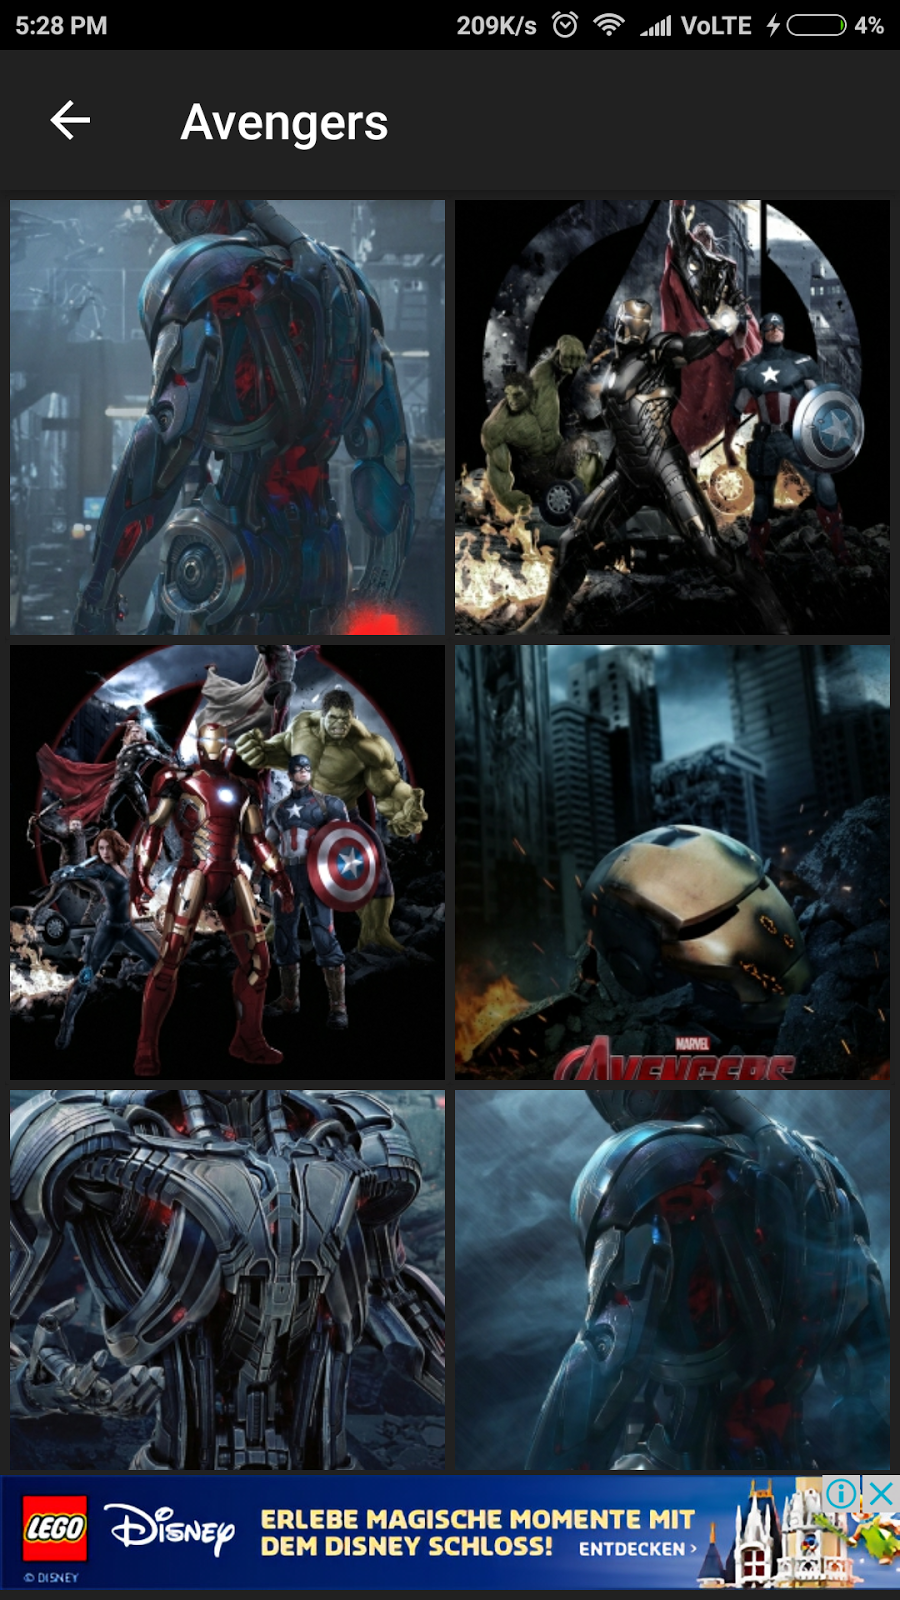 marvel wallpaper app,action adventure game,cg artwork,games,fictional character,pc game